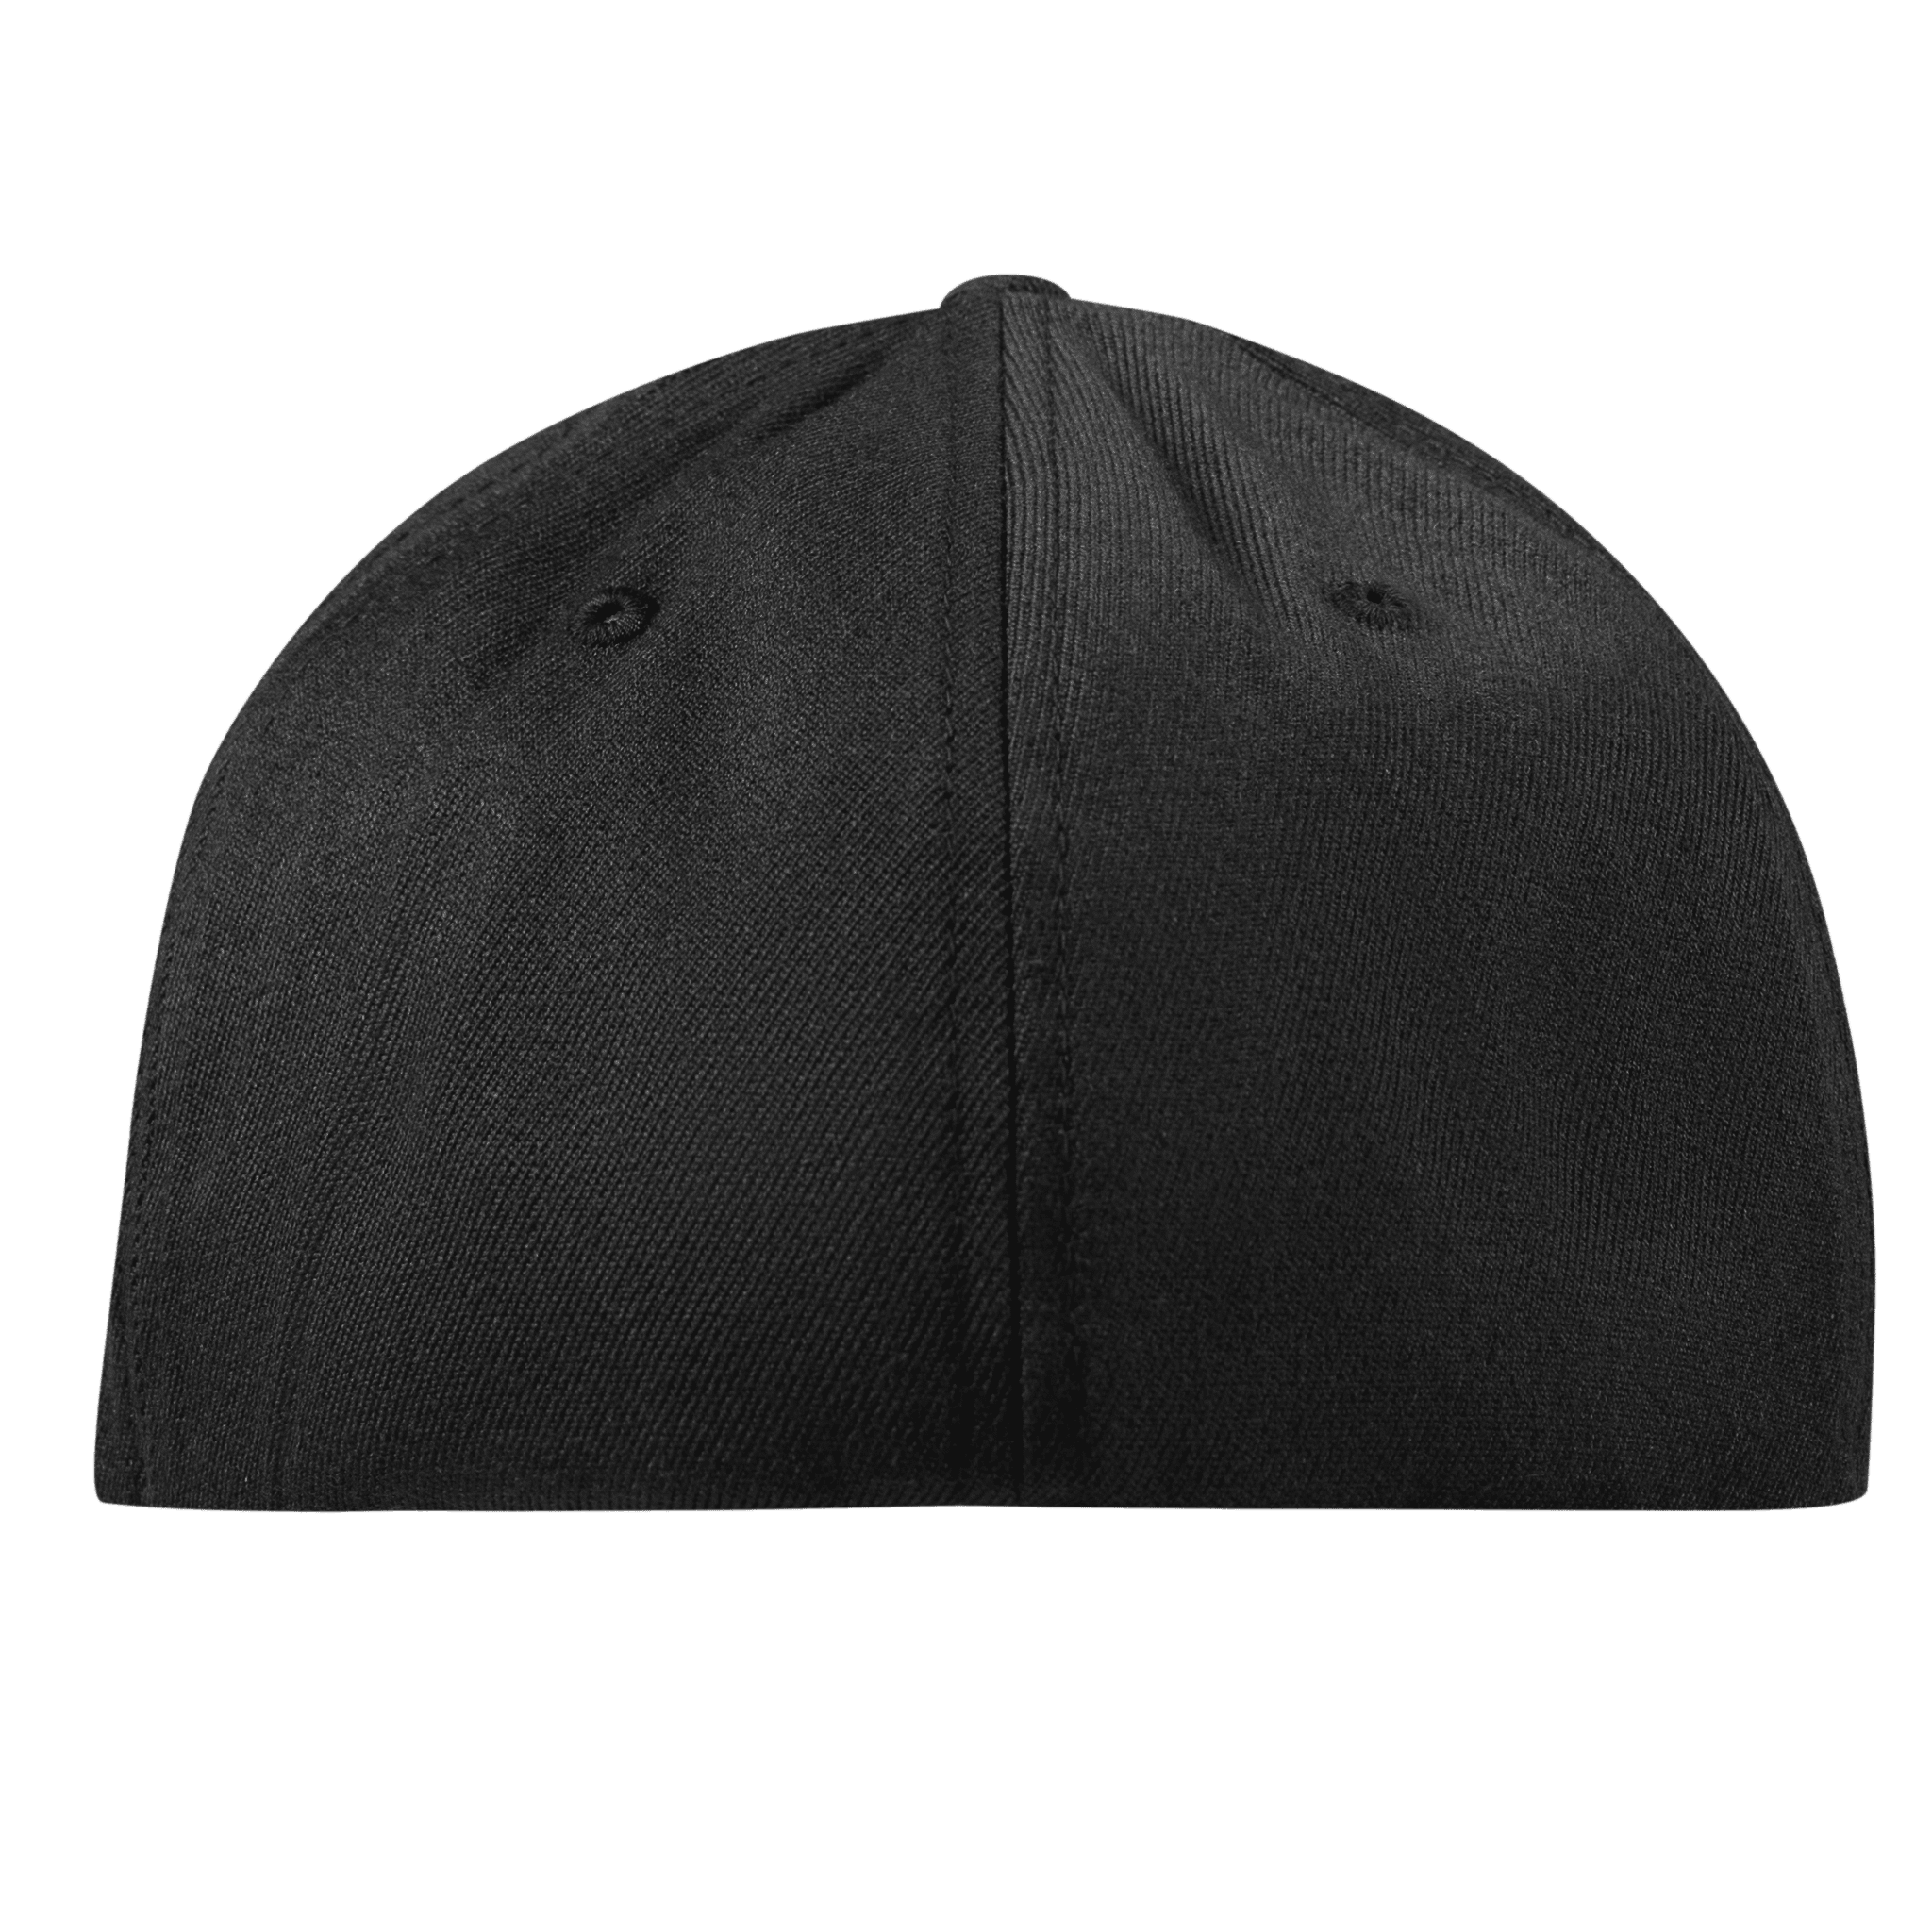 Wyoming Patriot Flexfit Fitted Back Black